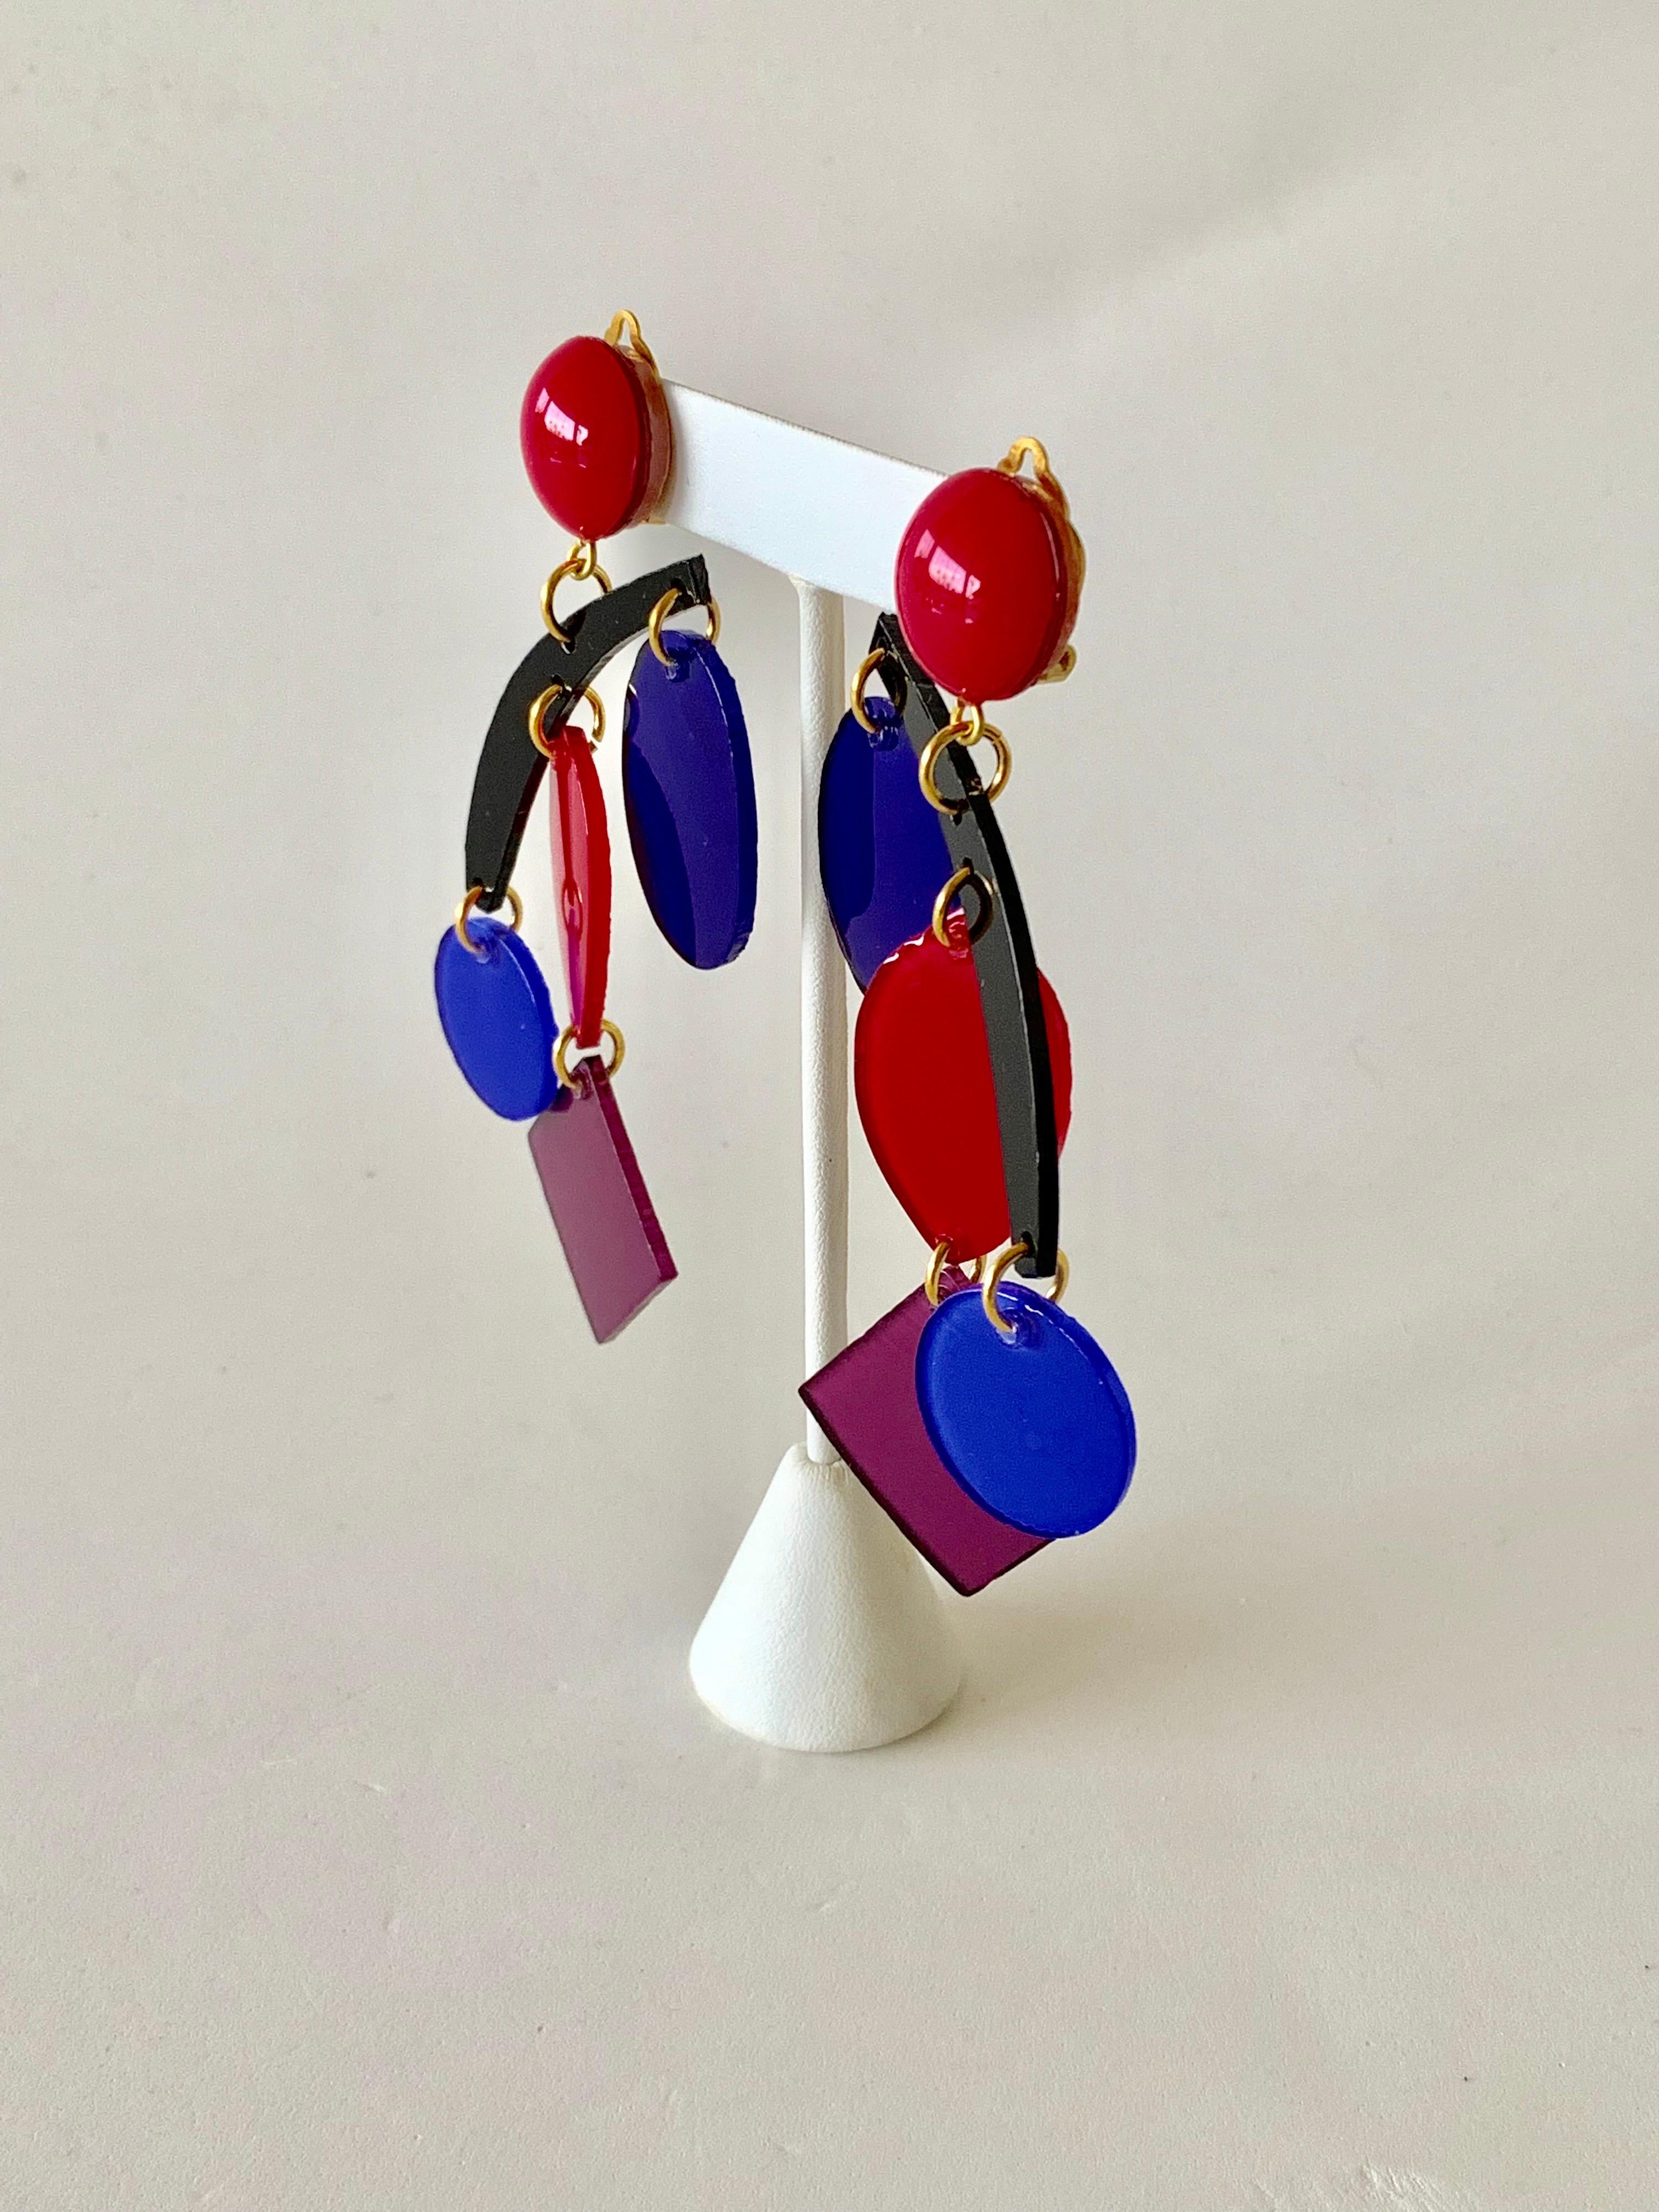 Colorful Modern Mobile Sculptural Statement Earrings 1